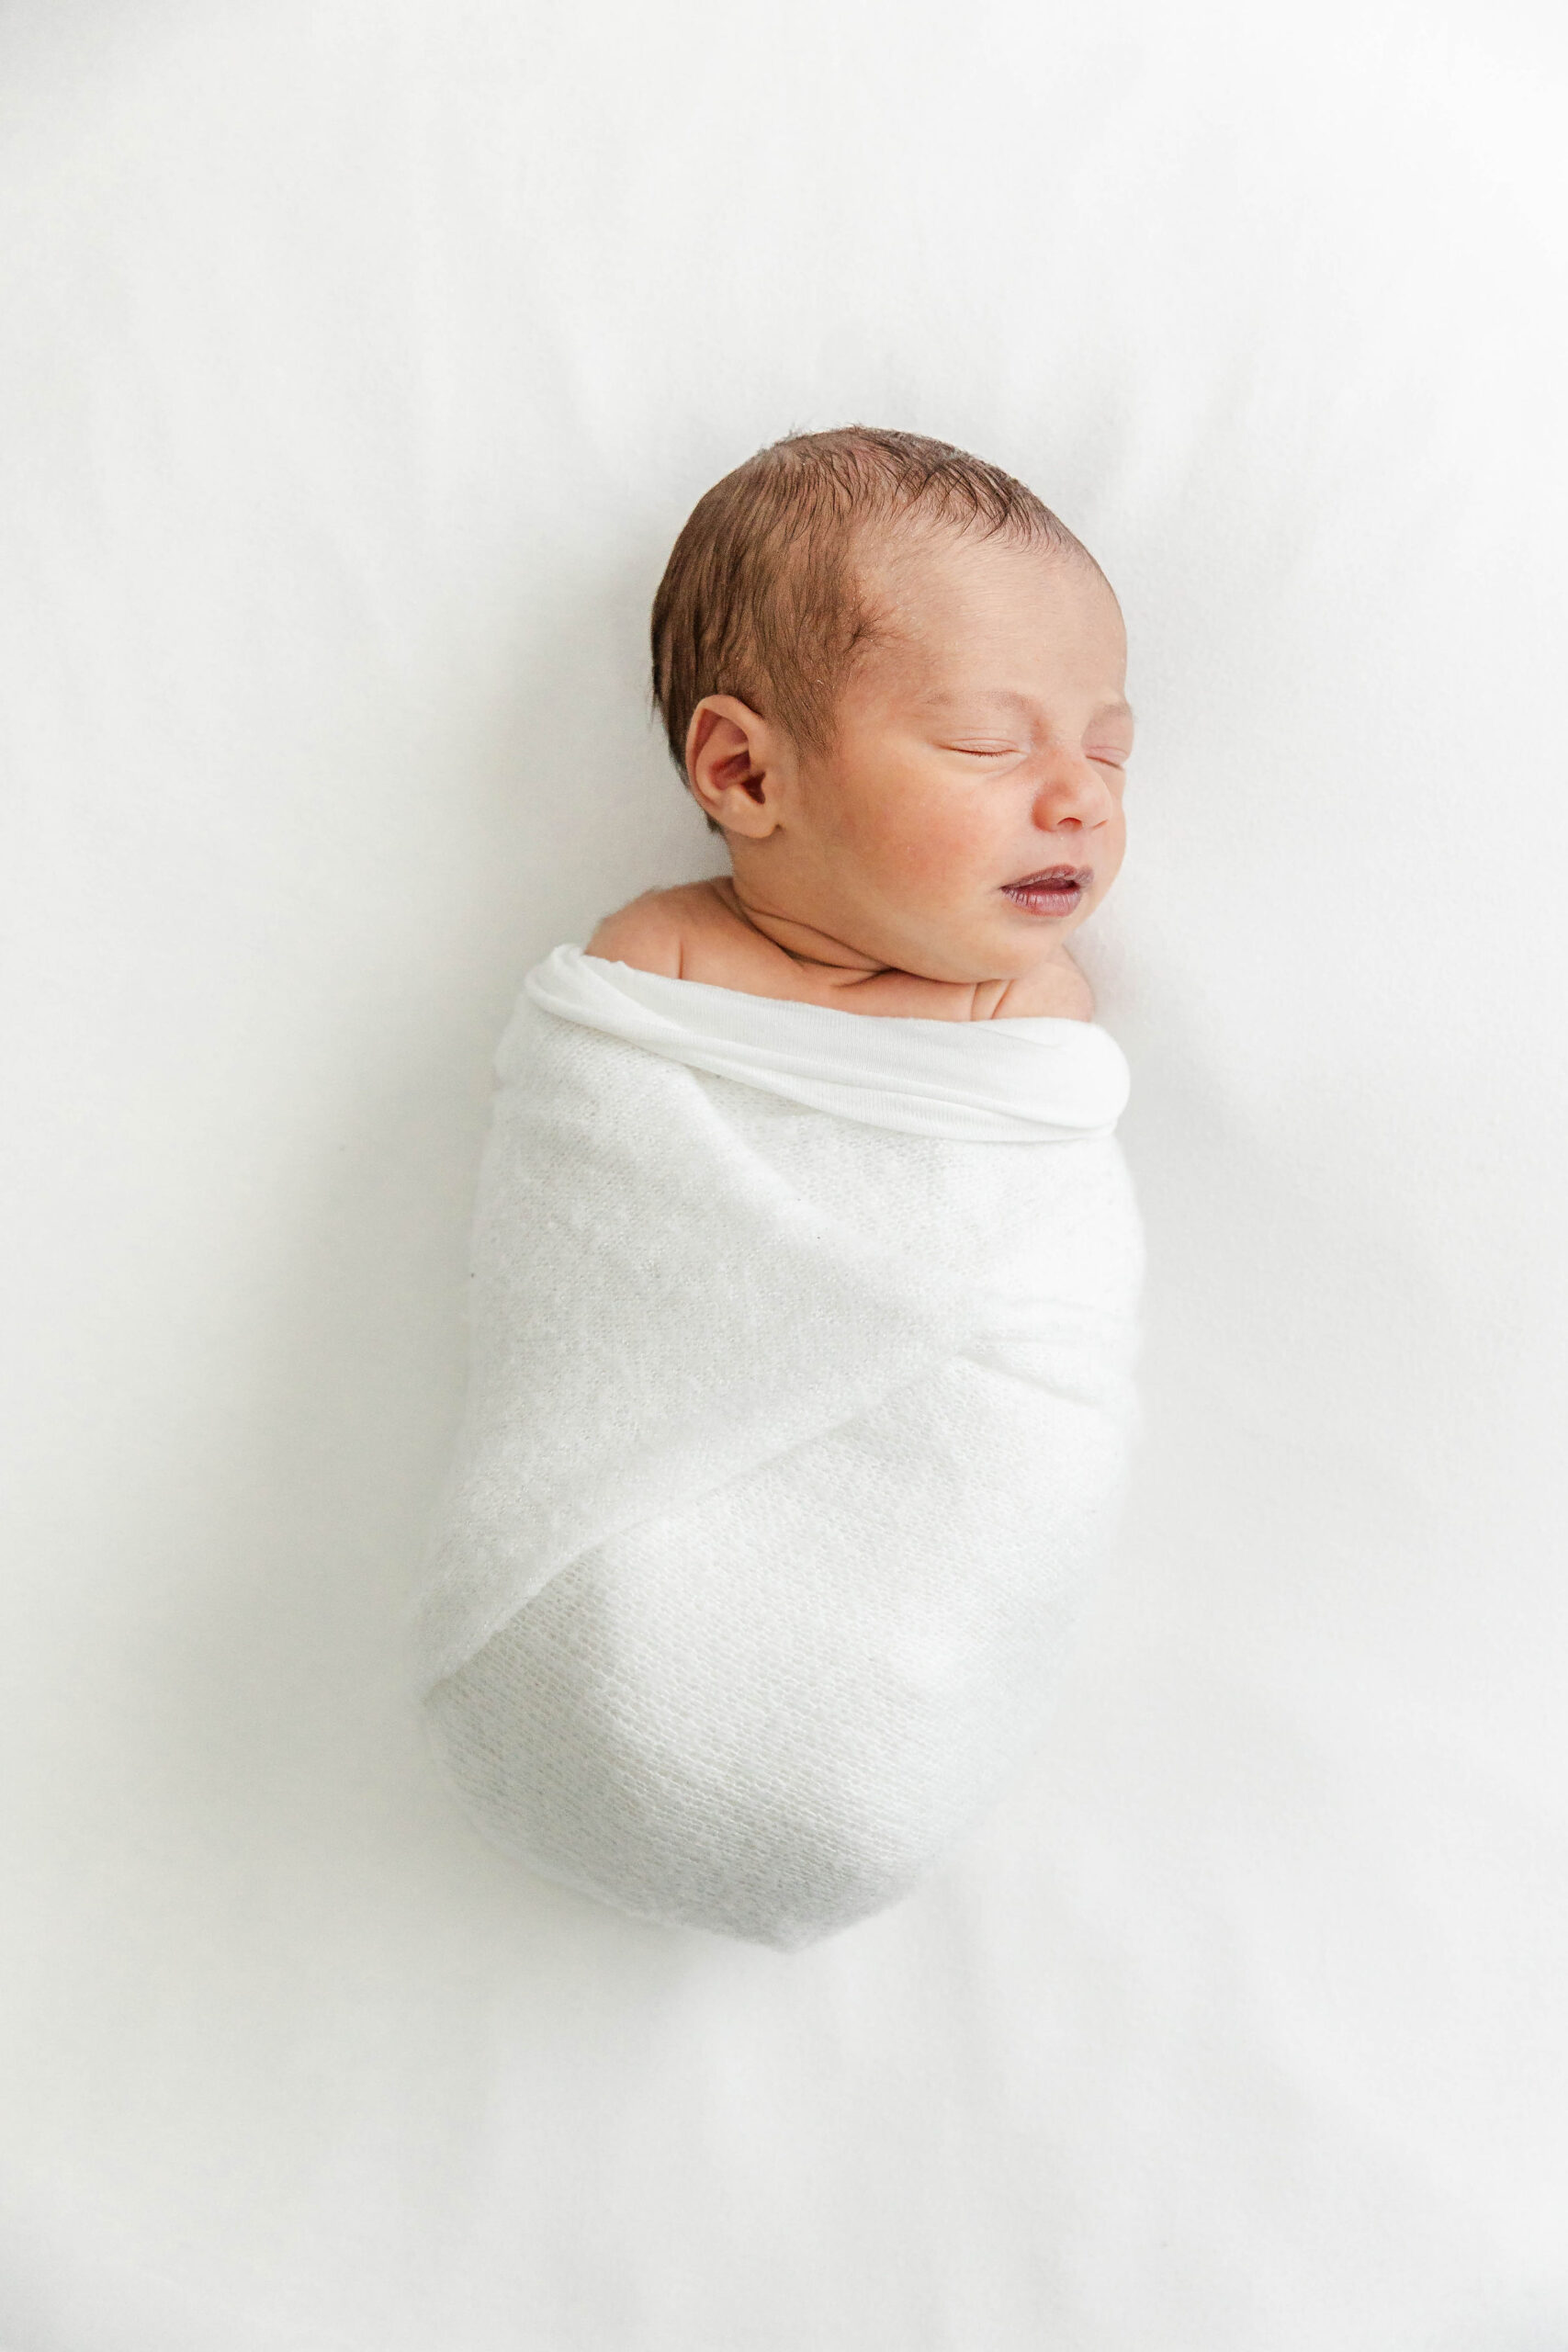 A newborn baby sleeps in a white swaddle on a bed in a studio